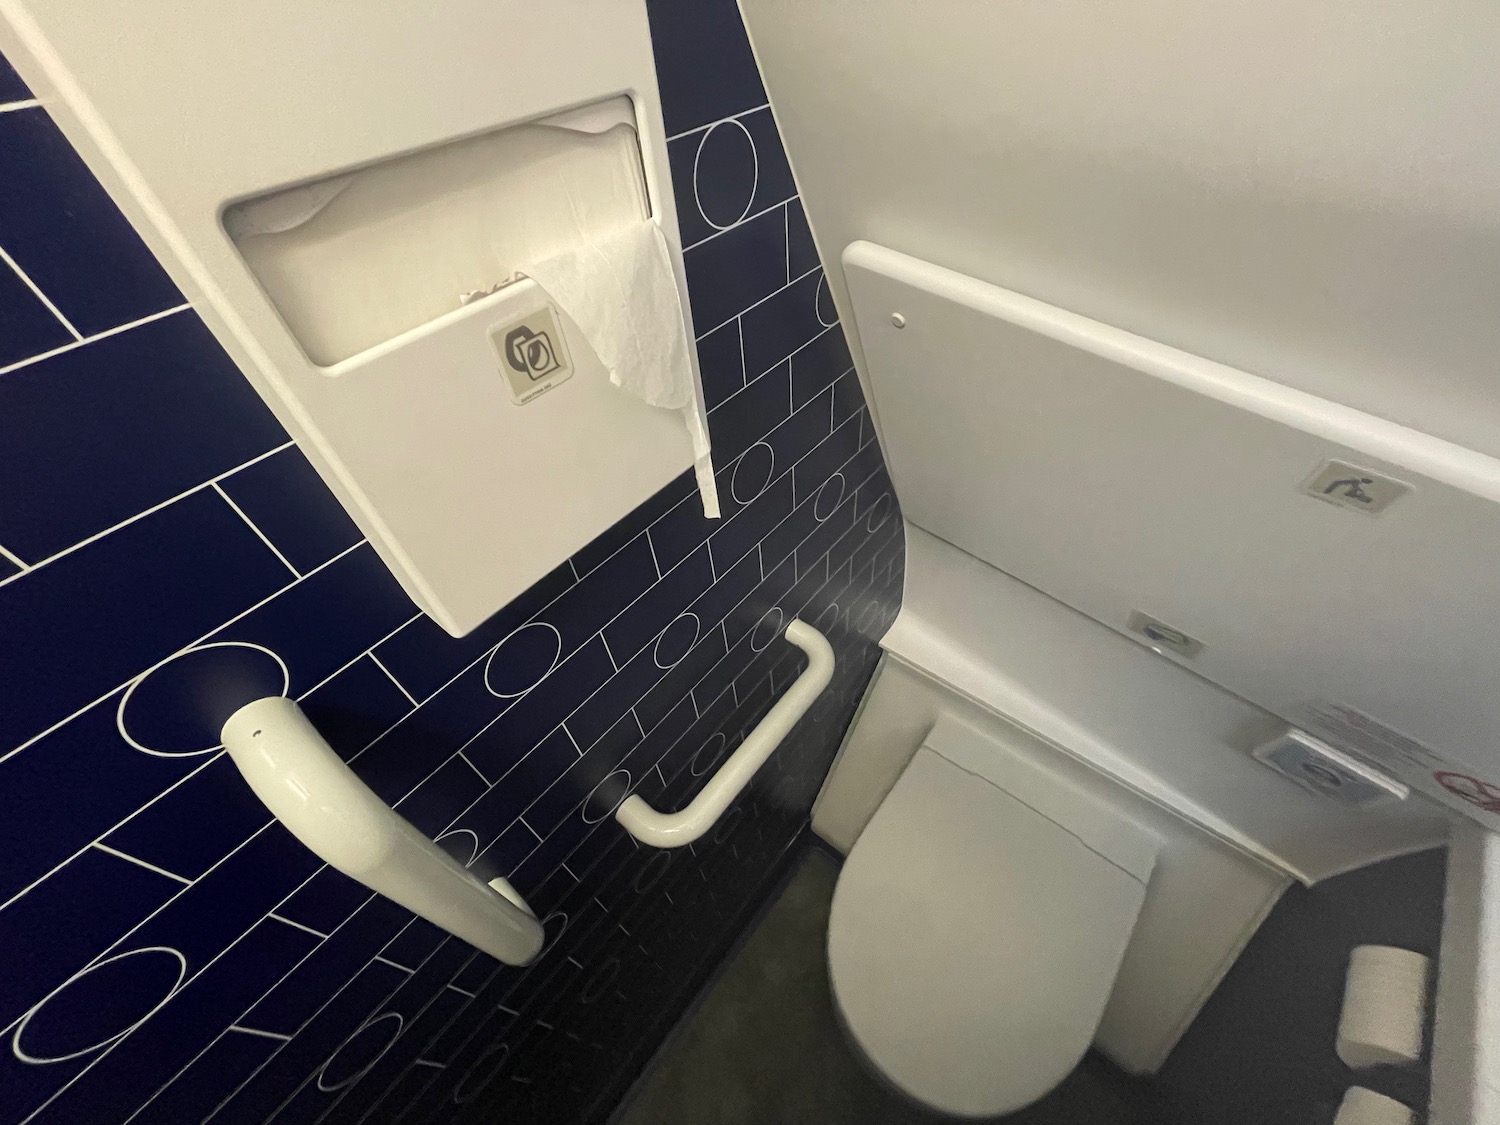 a toilet paper dispenser and handrails in a bathroom